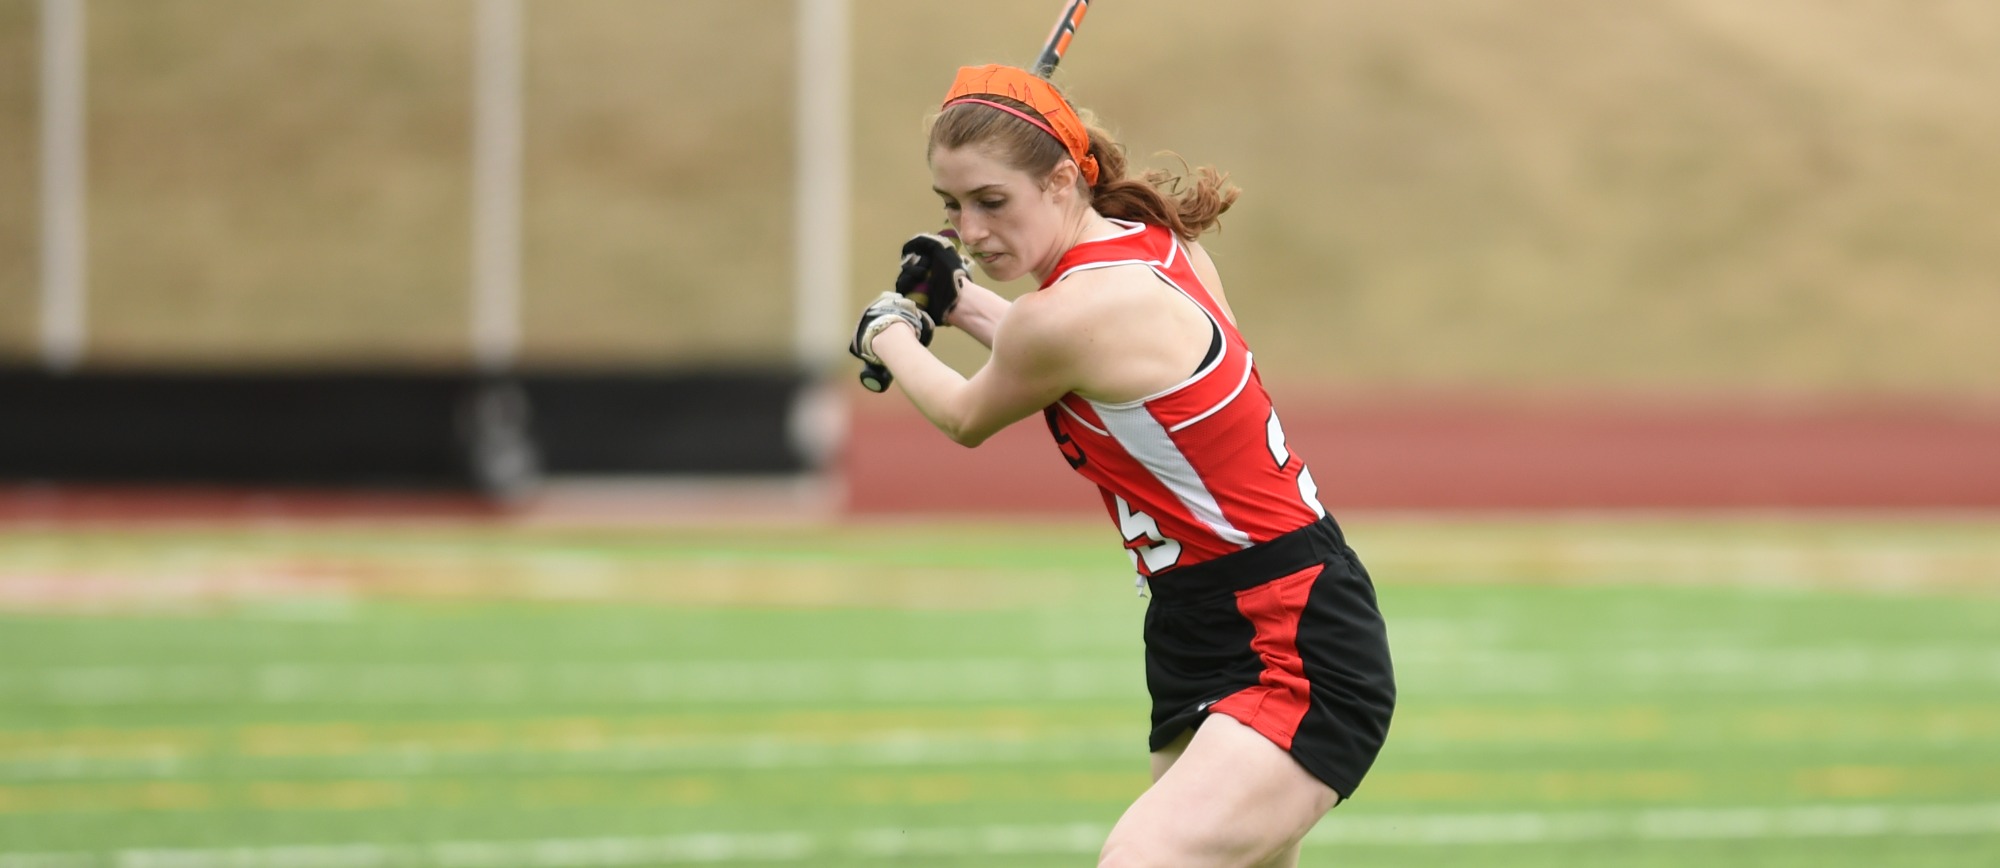 NCAC Play Opens Up for Field Hockey with 3-2 Loss to DePauw